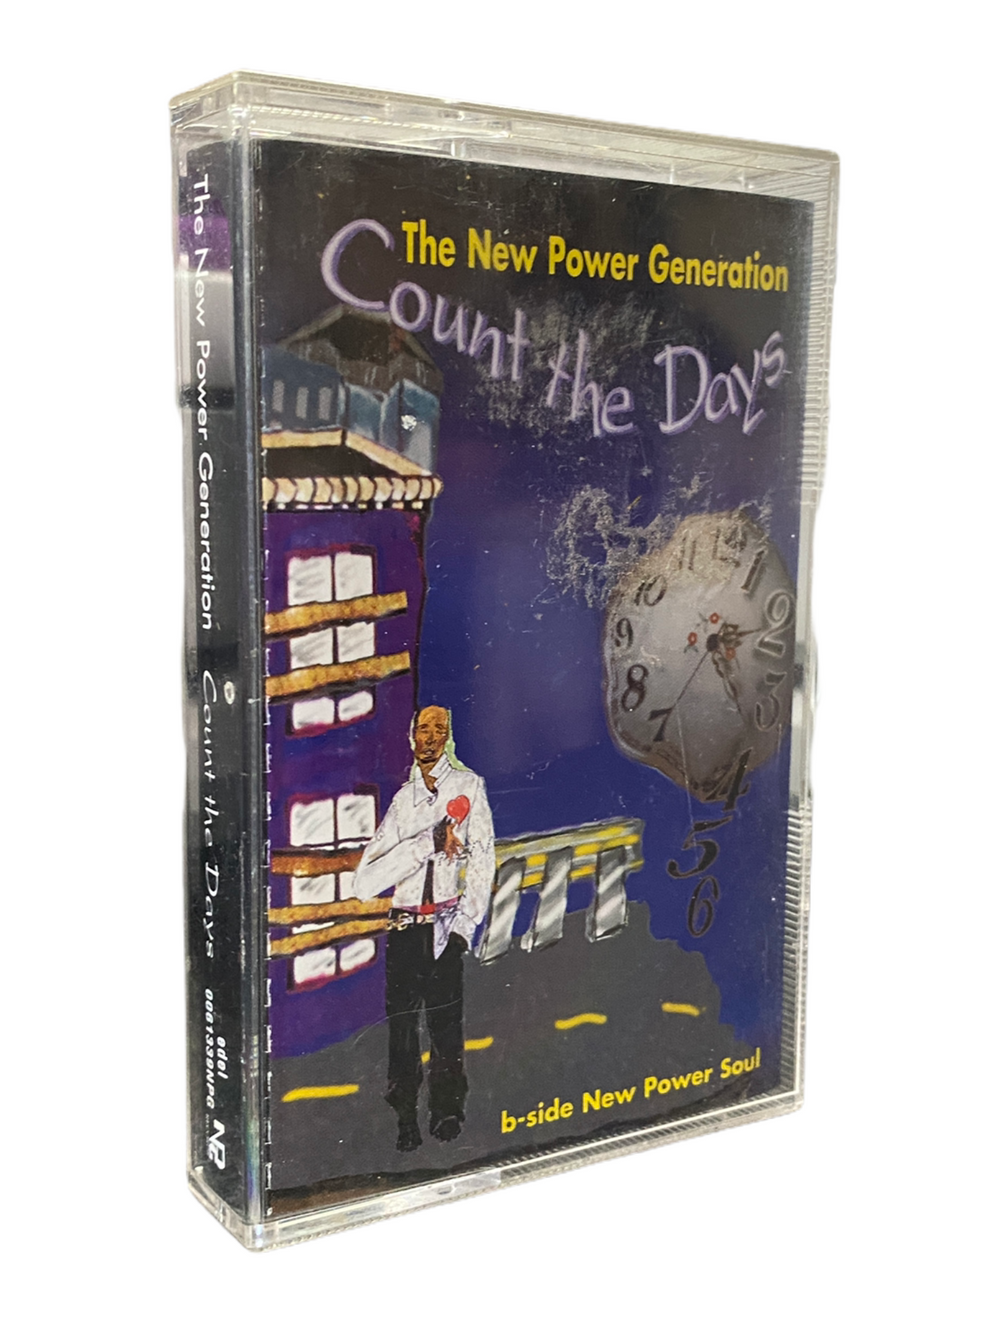 The NPG Prince Count The Days Original Tape Cassette Single Release